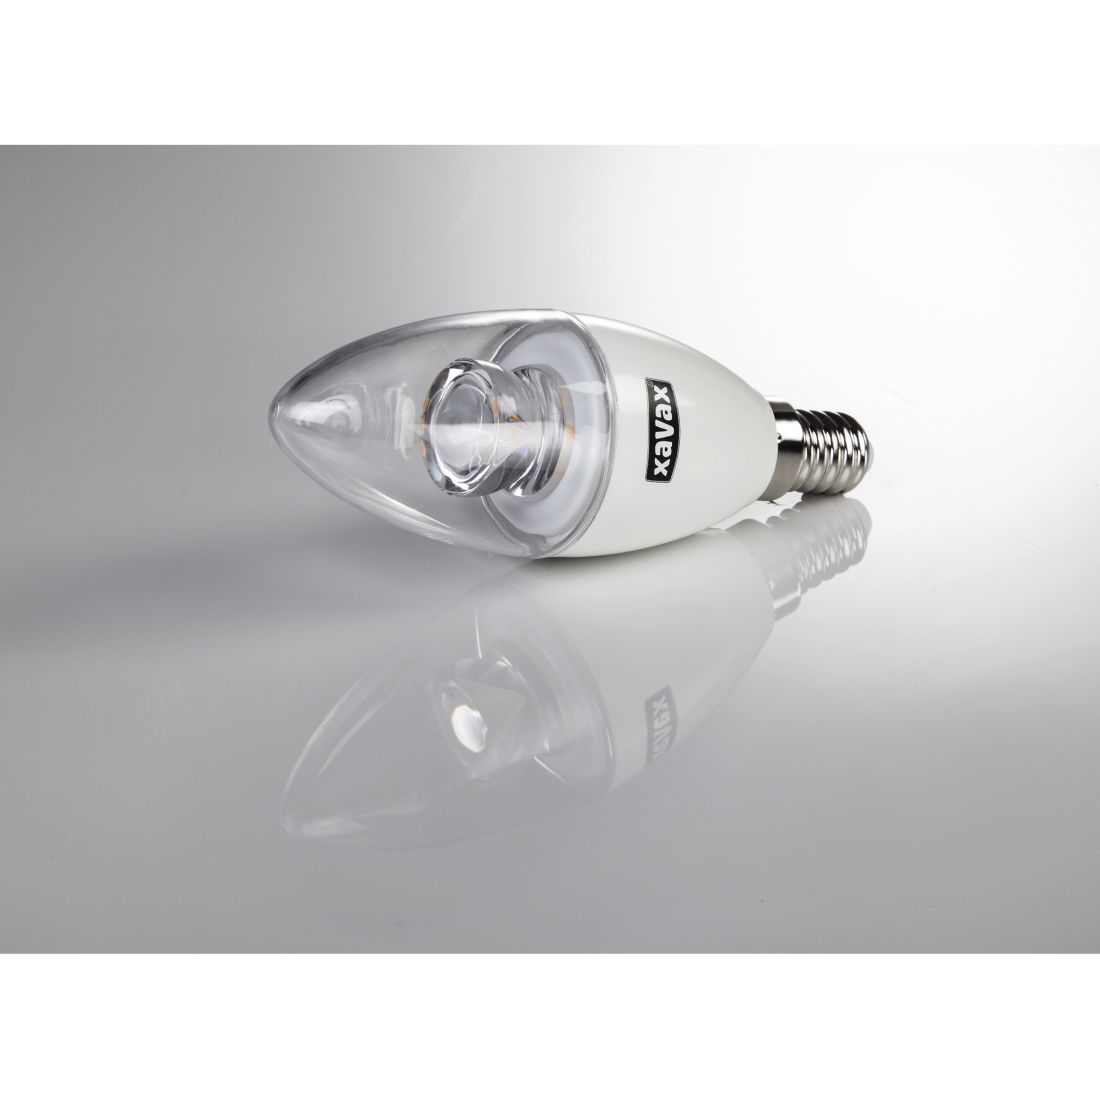 abx3 High-Res Image 3 - Xavax, LED Bulb, E14, 470lm replaces 40W, candle bulb, warm white, dimmable